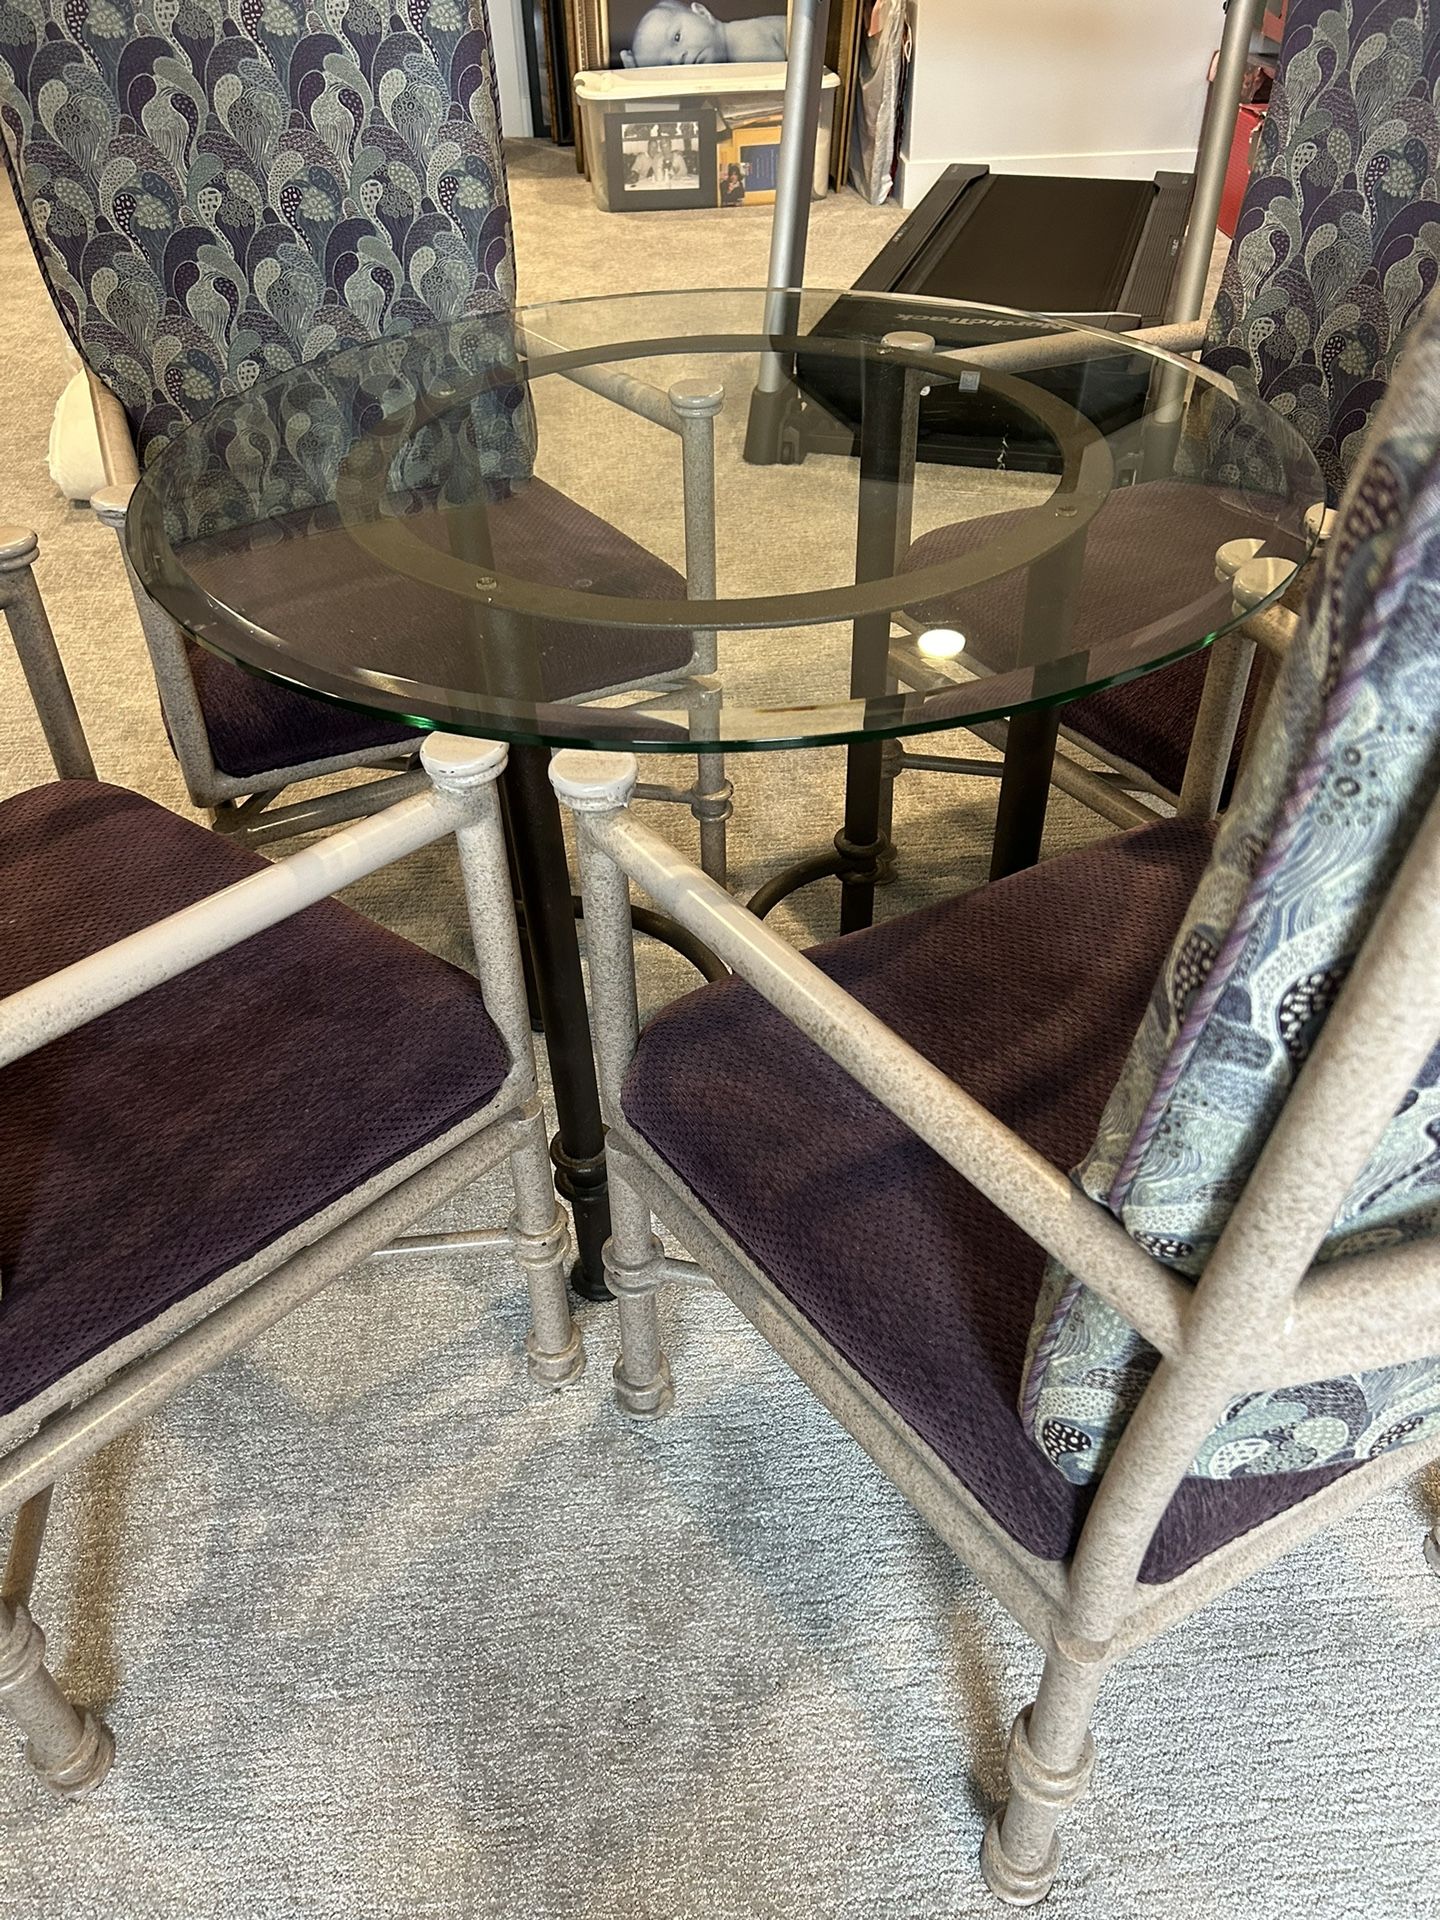 Glass Table With Turnable Chairs